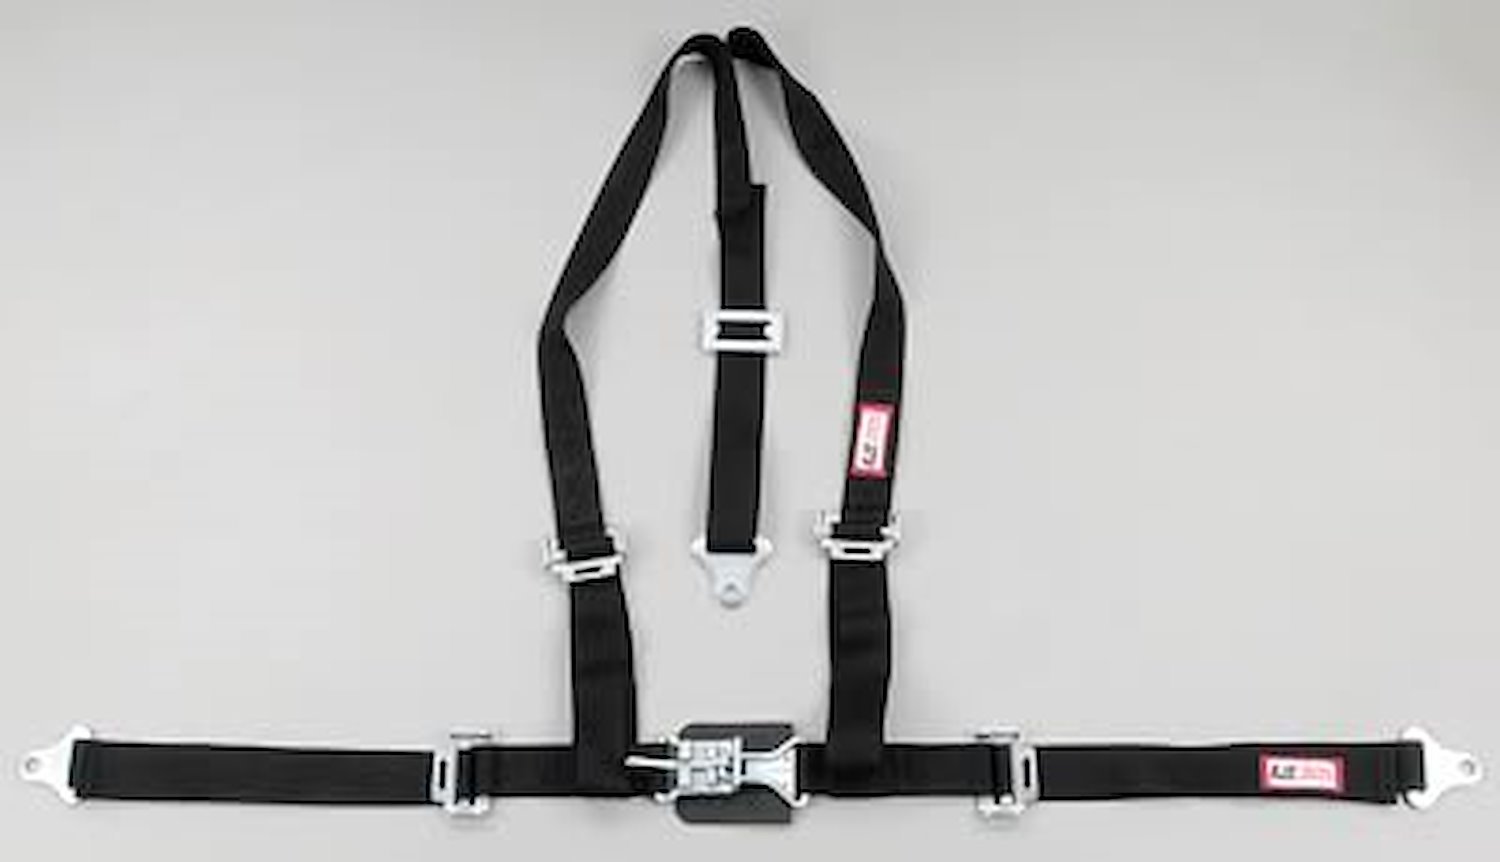 NON-SFI L&L HARNESS 2 PULL UP Lap Belt SNAP SEWN IN 2 S.H. Y FLOOR Mount WRAP/SNAP BLACK